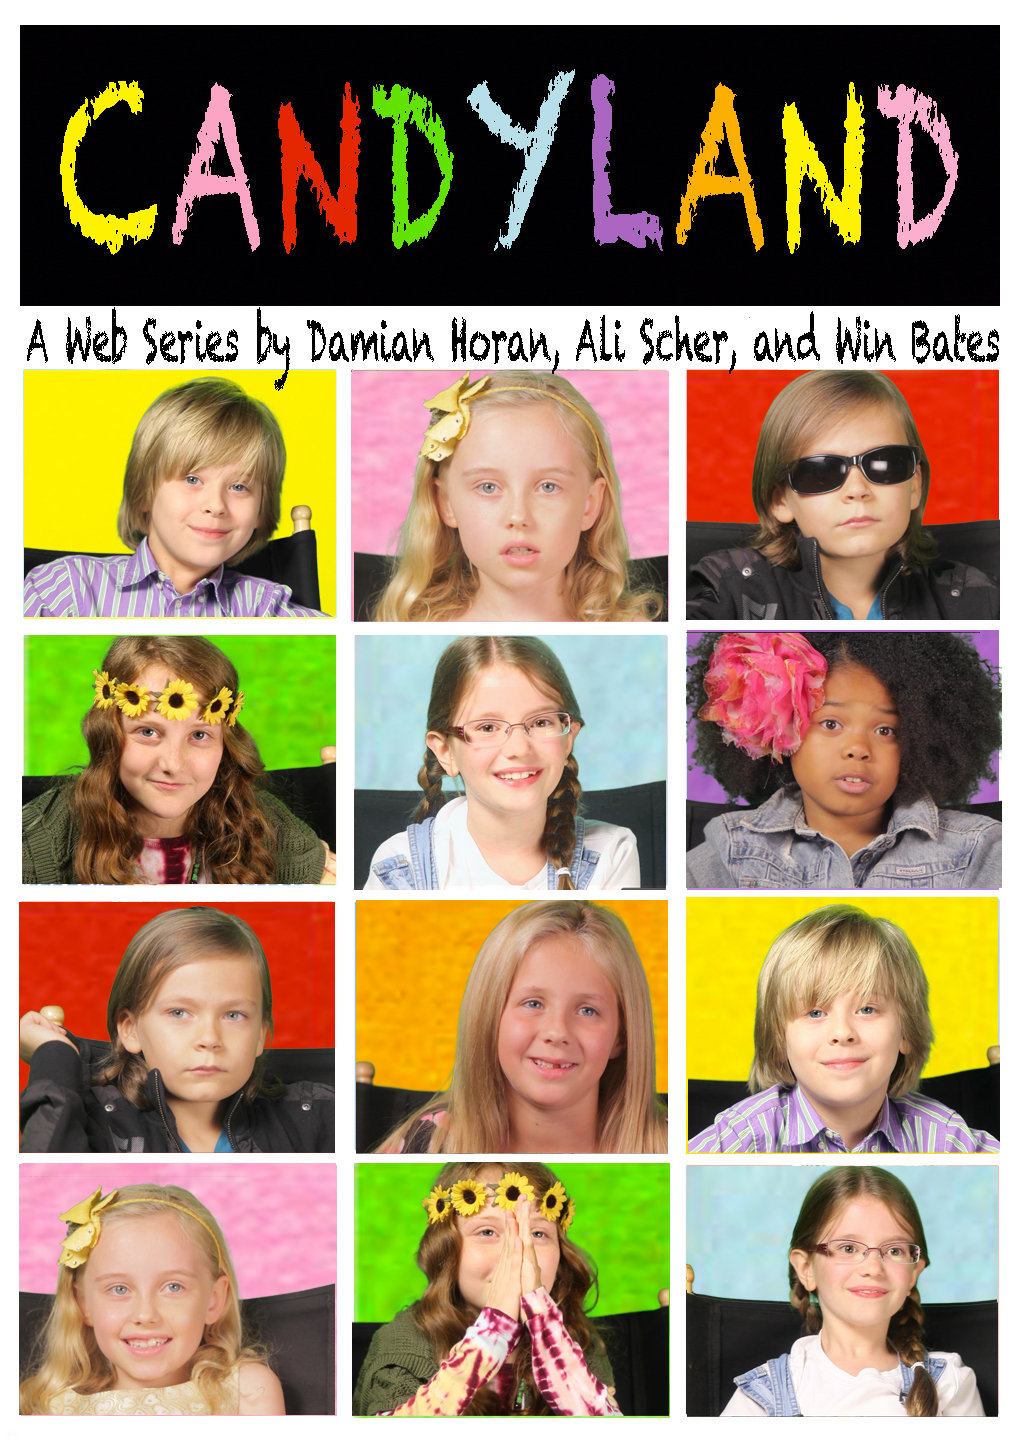 Katherine Manchester, Shayna Brooke Chapman, Gracie Hall, Mikey Effie, Wes Watson, Tatum Hentemann and Mma-Syrai Alek in CandyLand: A Web Series (2012)